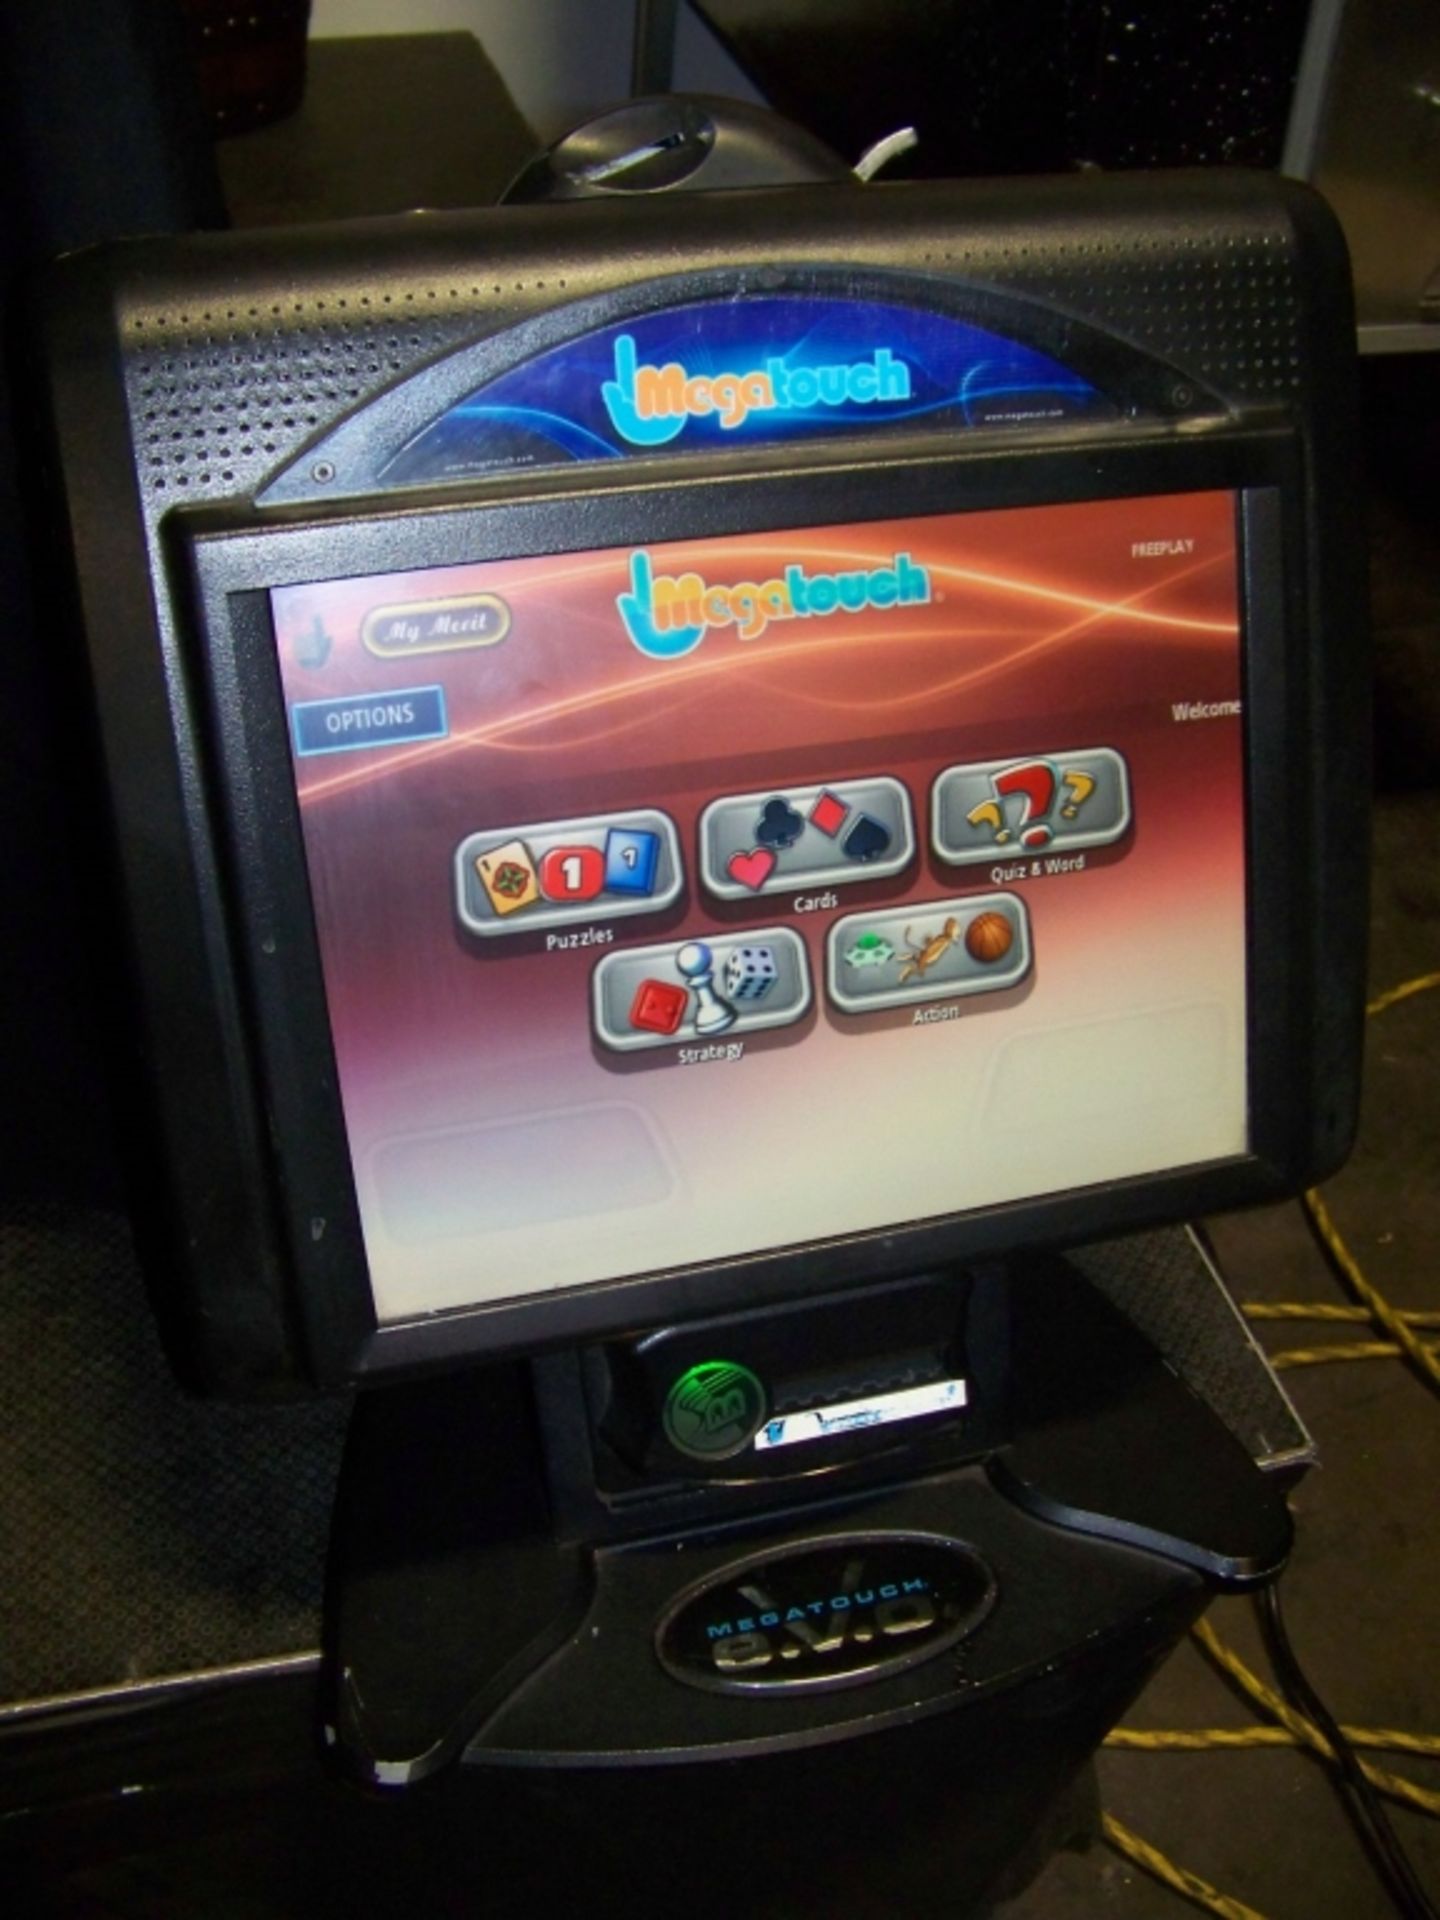 MEGATOUCH 2011 COUNTER TOP ARCADE GAME Item is in used condition. Evidence of wear and commercial - Image 2 of 2